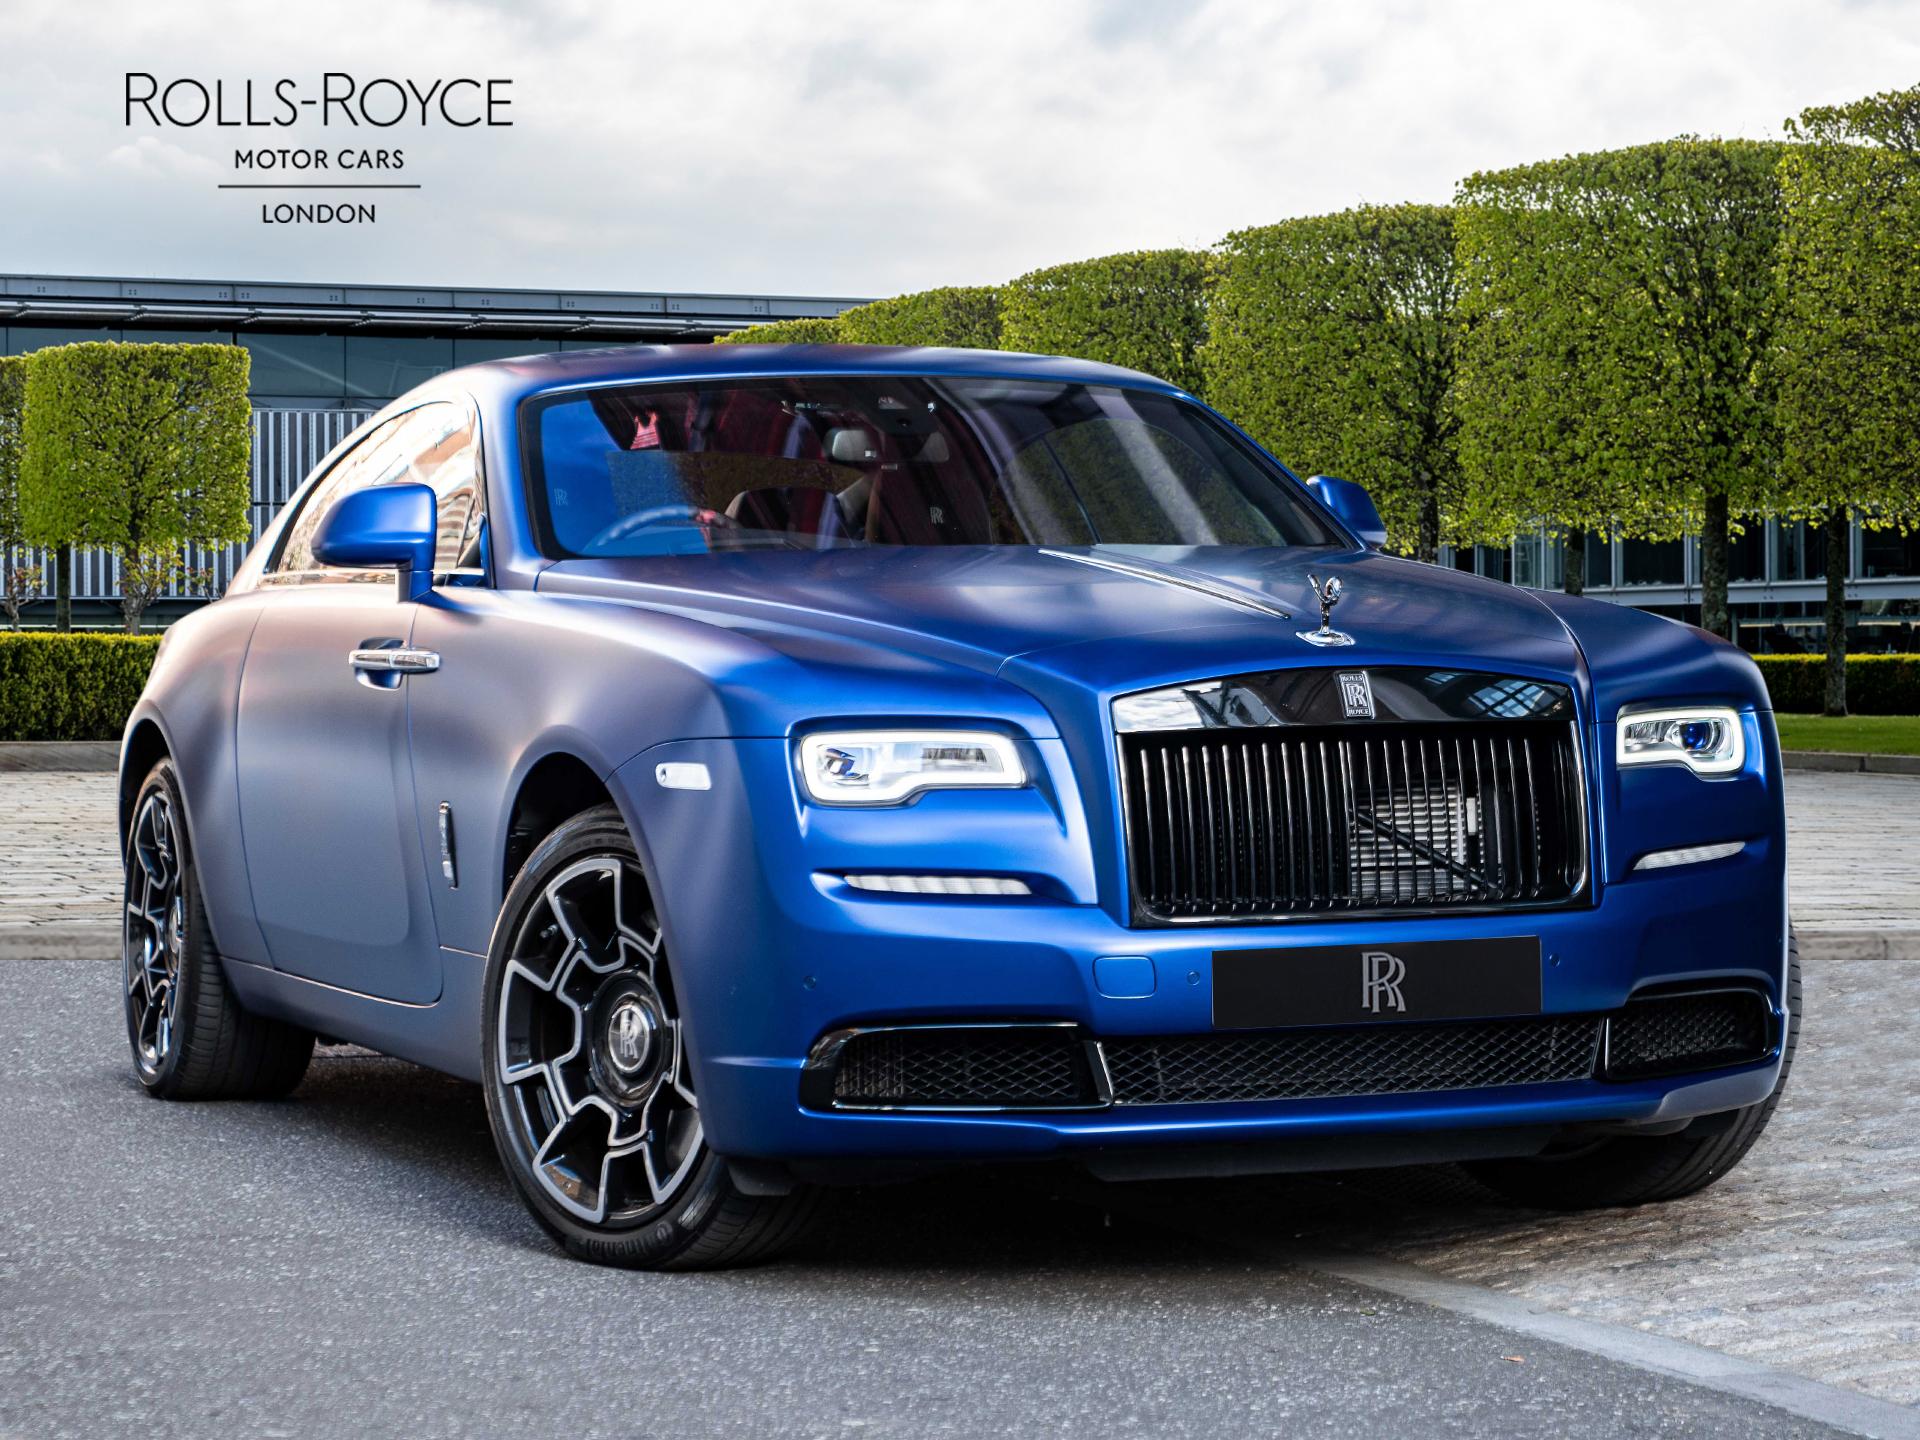 Used RollsRoyce Models for Sale with Photos  CARFAX